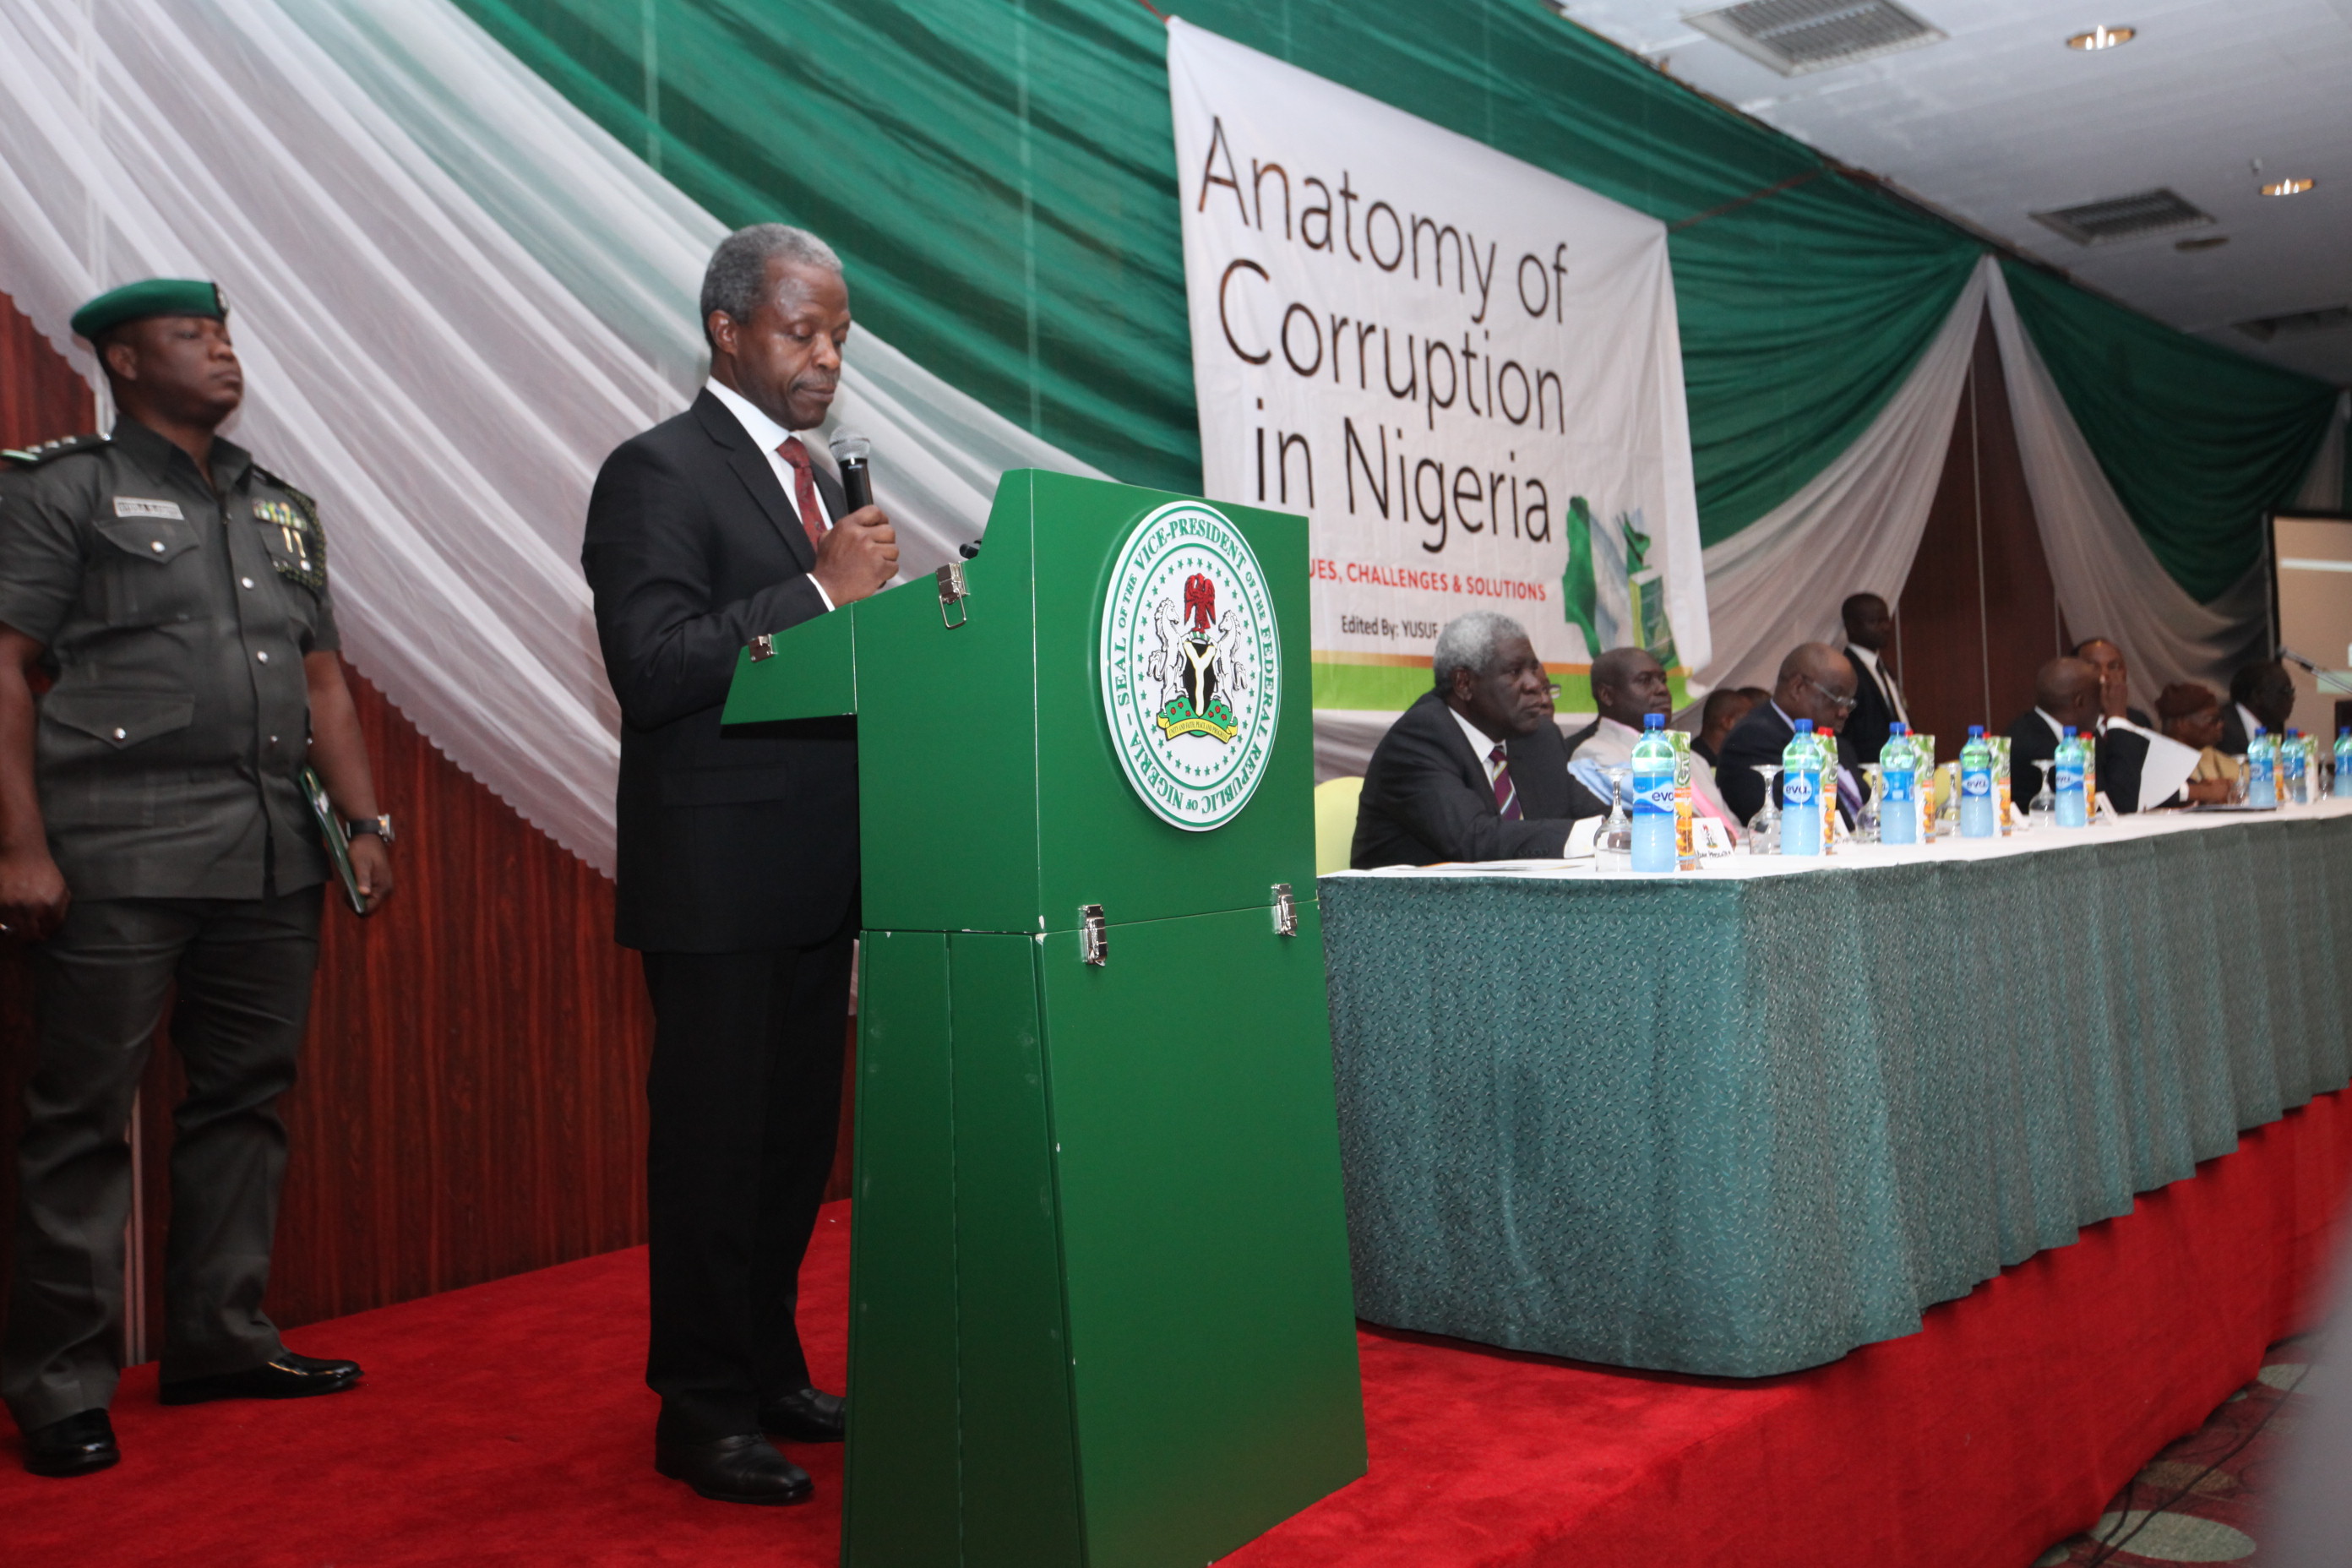 VP Osinbajo At The Presentation Of Anatomy Of Corruption In Nigeria; Issues, Challenges & Solutions On 17/05/2016